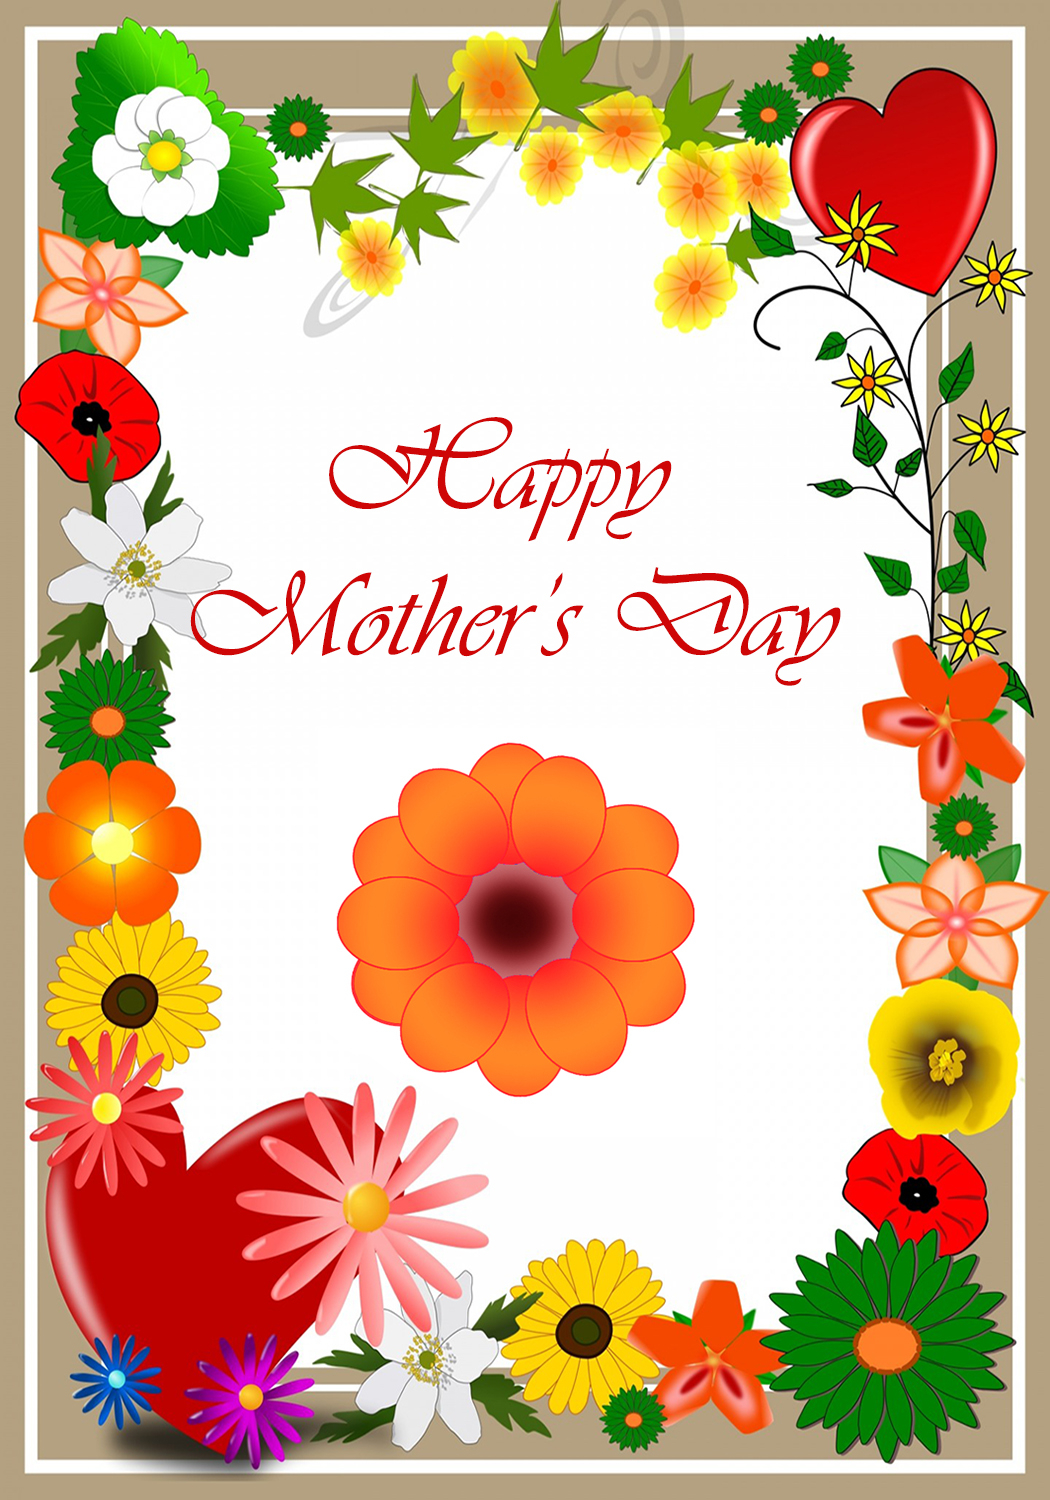 17 Mother s Day Greeting Cards Free Printable Greeting Cards